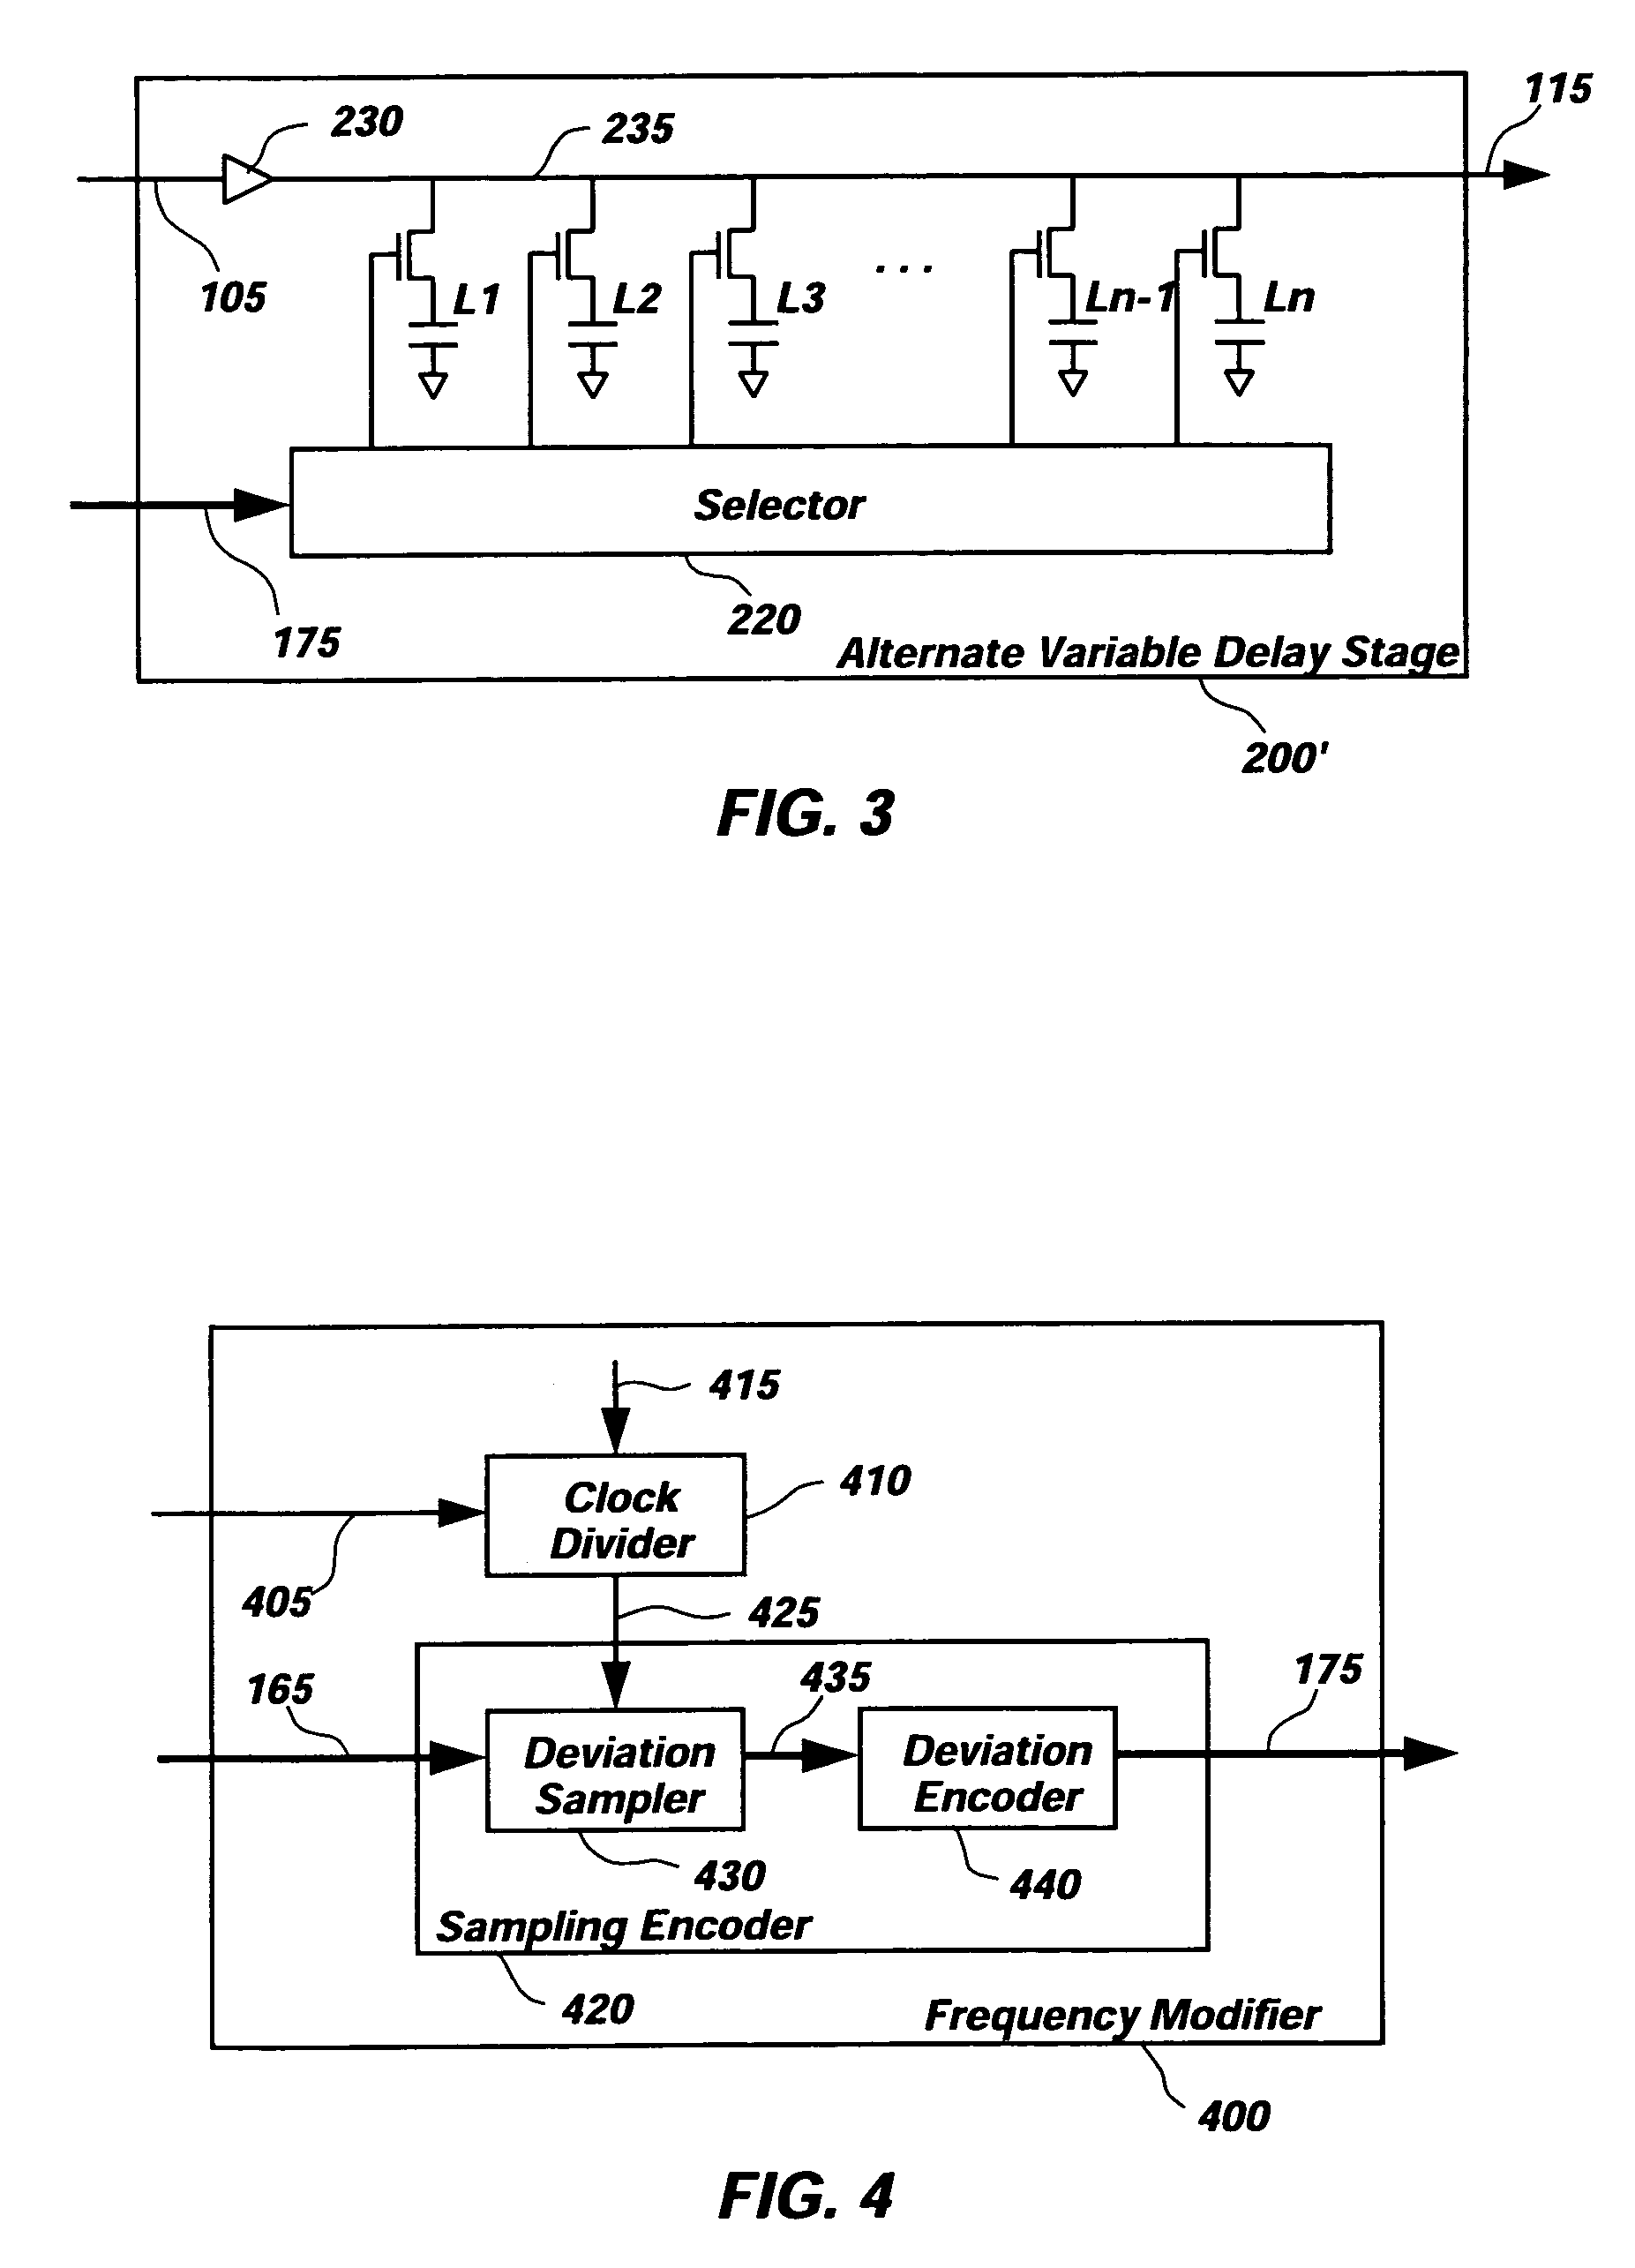 On-chip variable oscillator method and apparatus